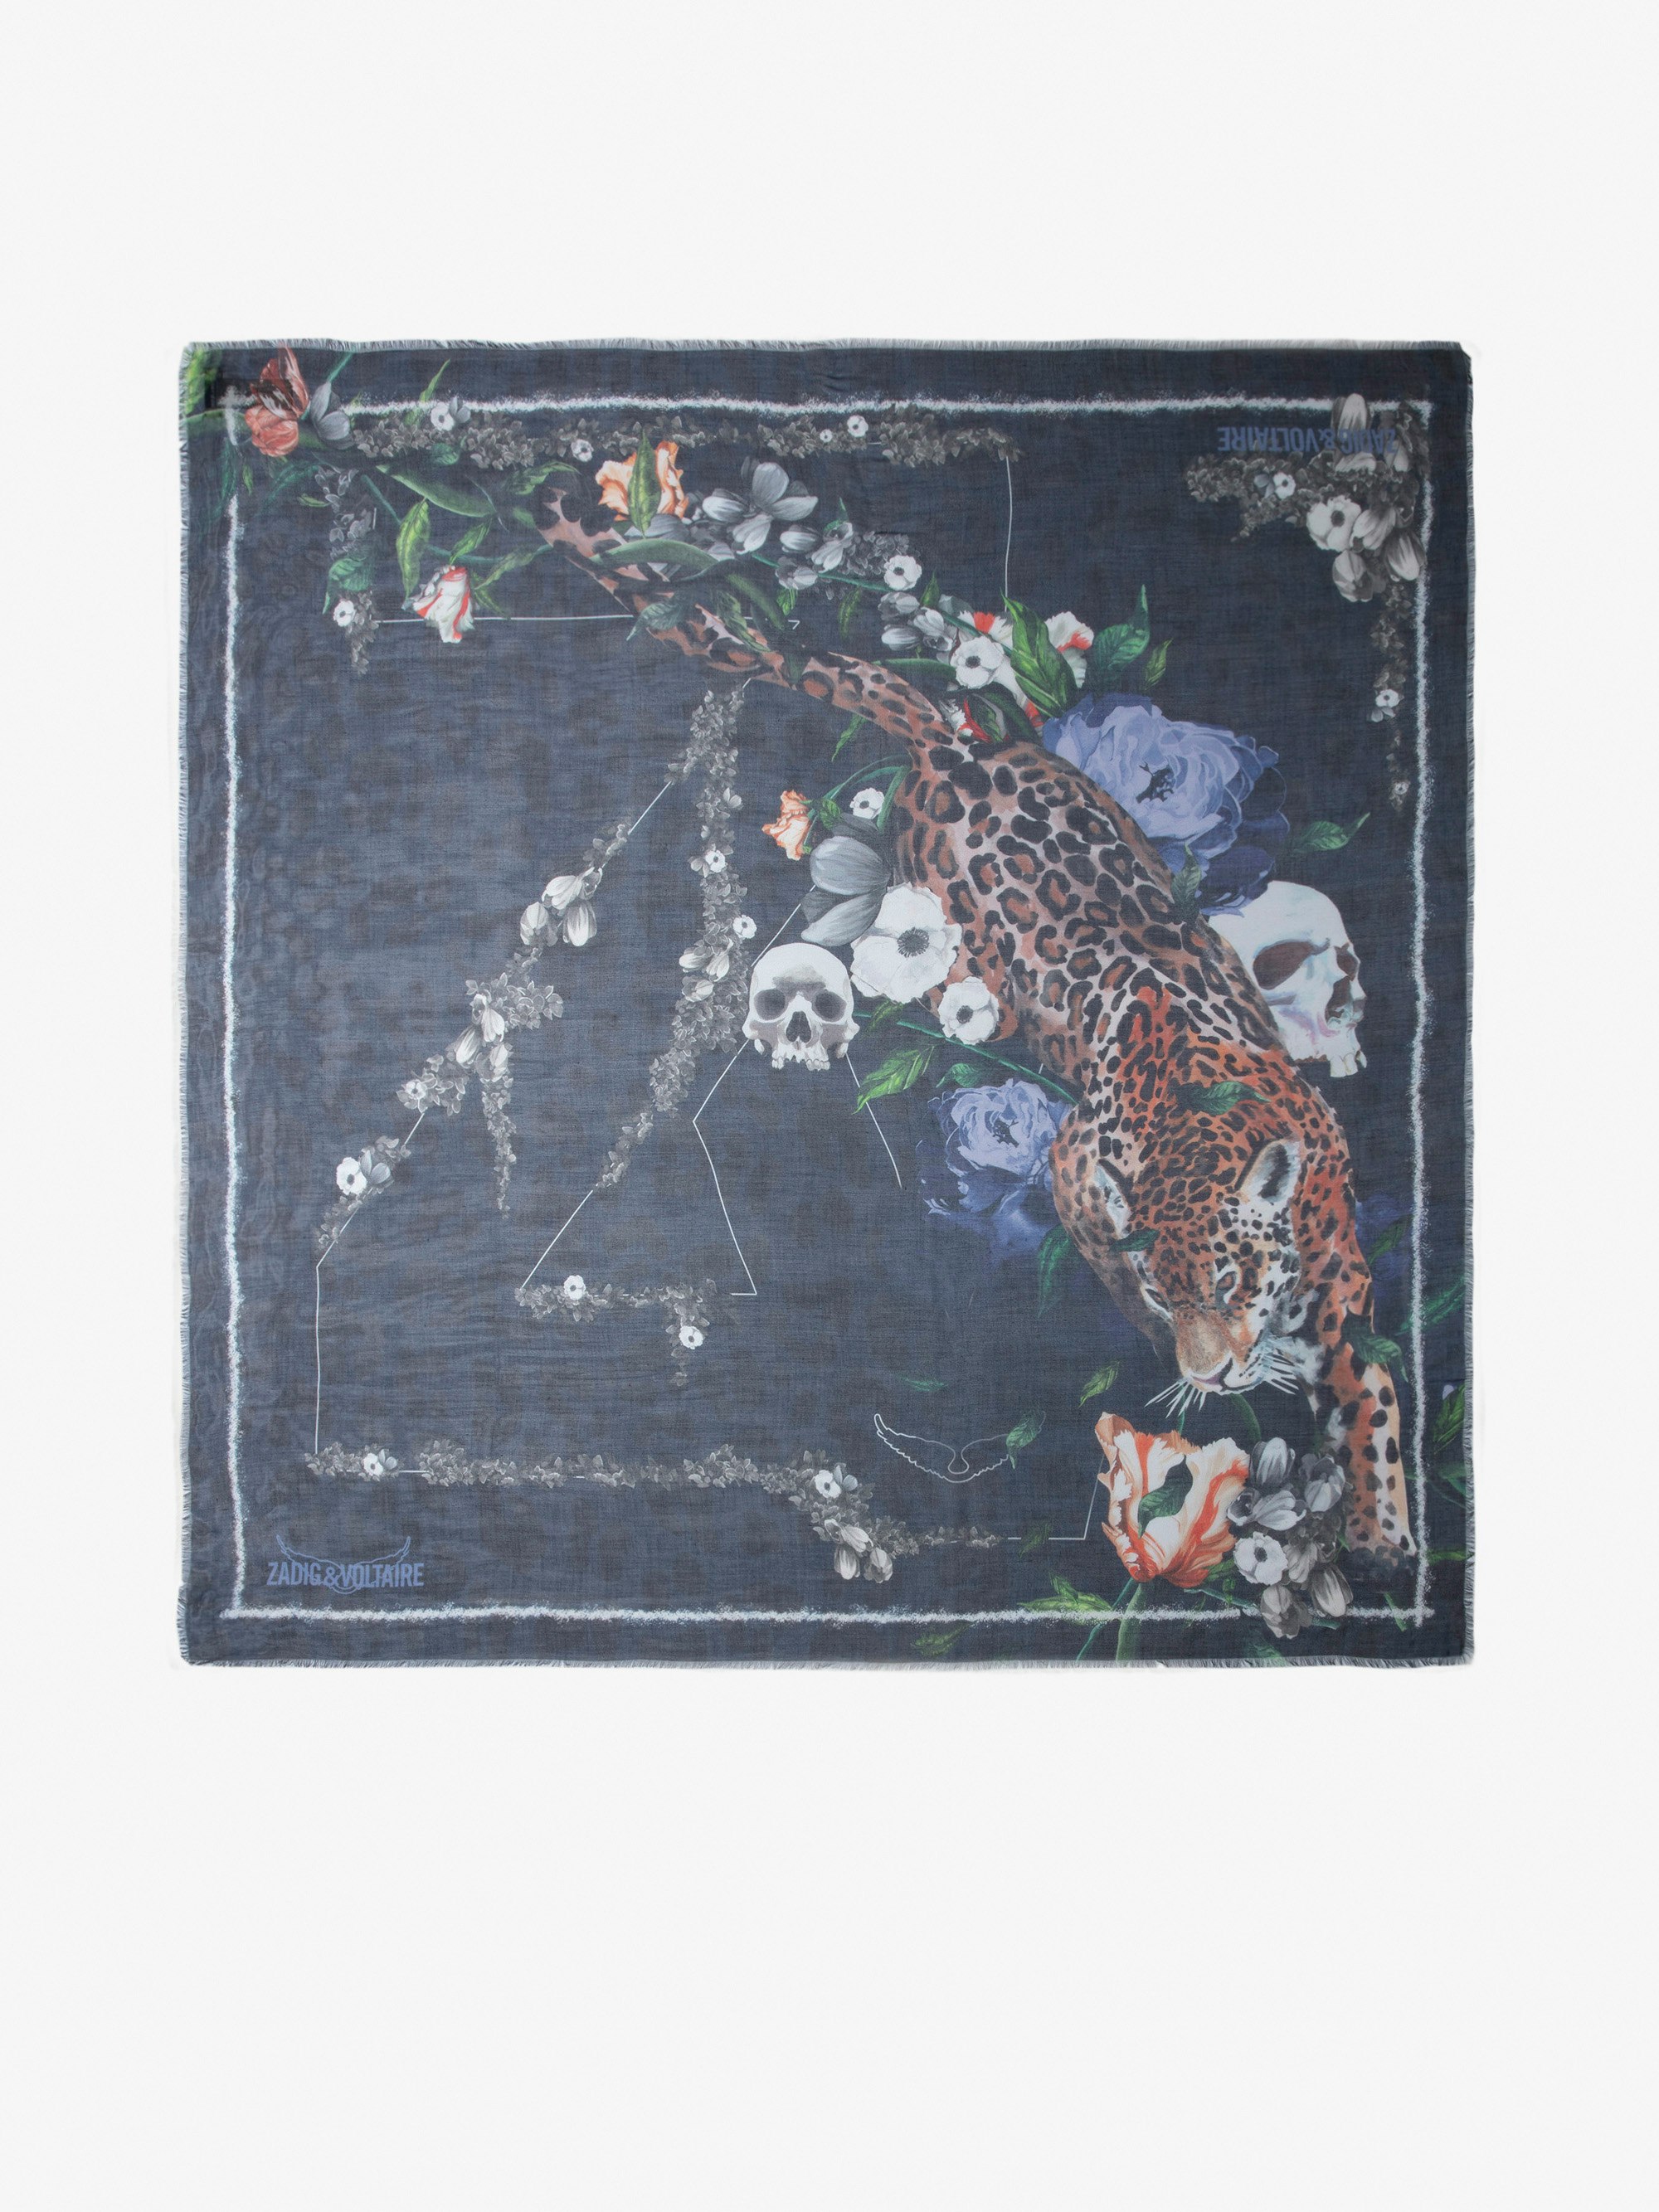 Kerry Scarf - Women’s navy blue scarf with wild, floral and skull print and ZV signature.